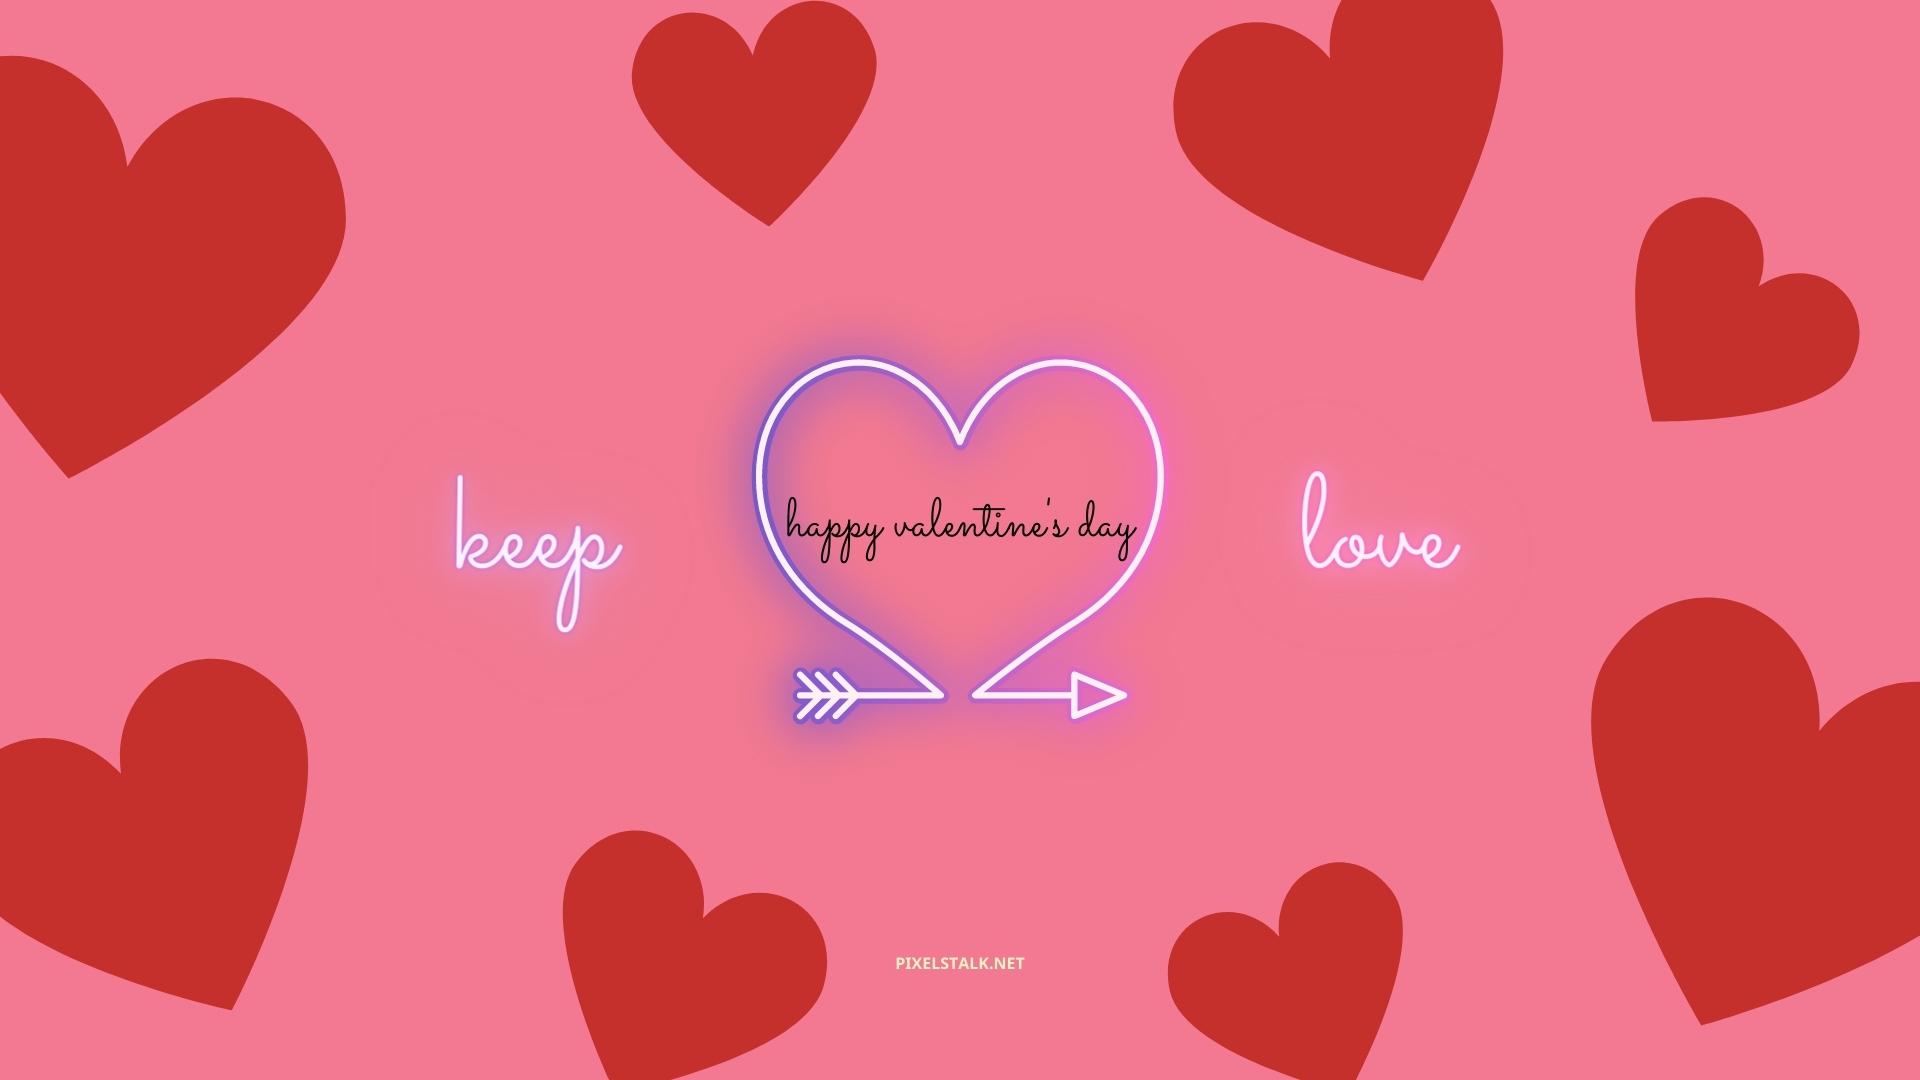 A heart shaped neon sign that says keep valentine's day love - Valentine's Day